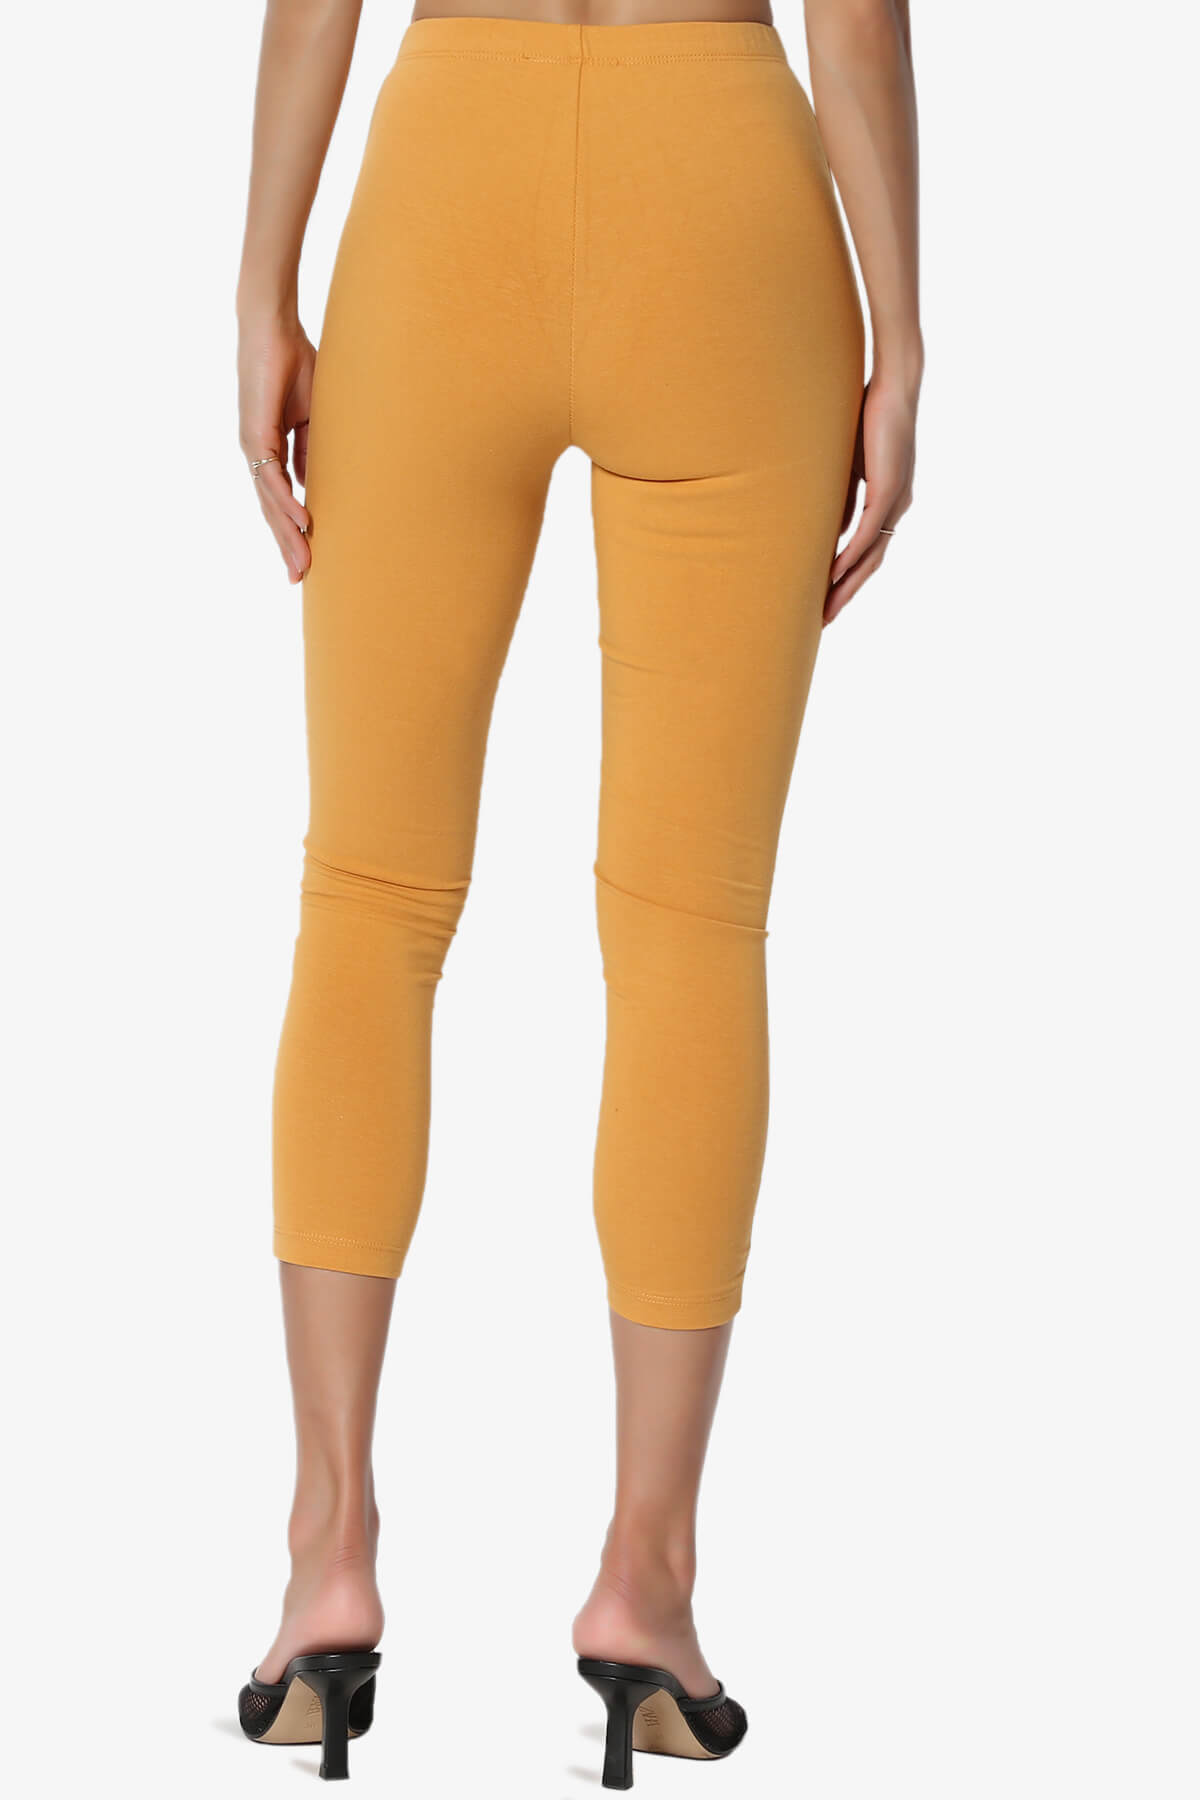 Load image into Gallery viewer, Ansley Luxe Cotton Capri Leggings MUSTARD_2
